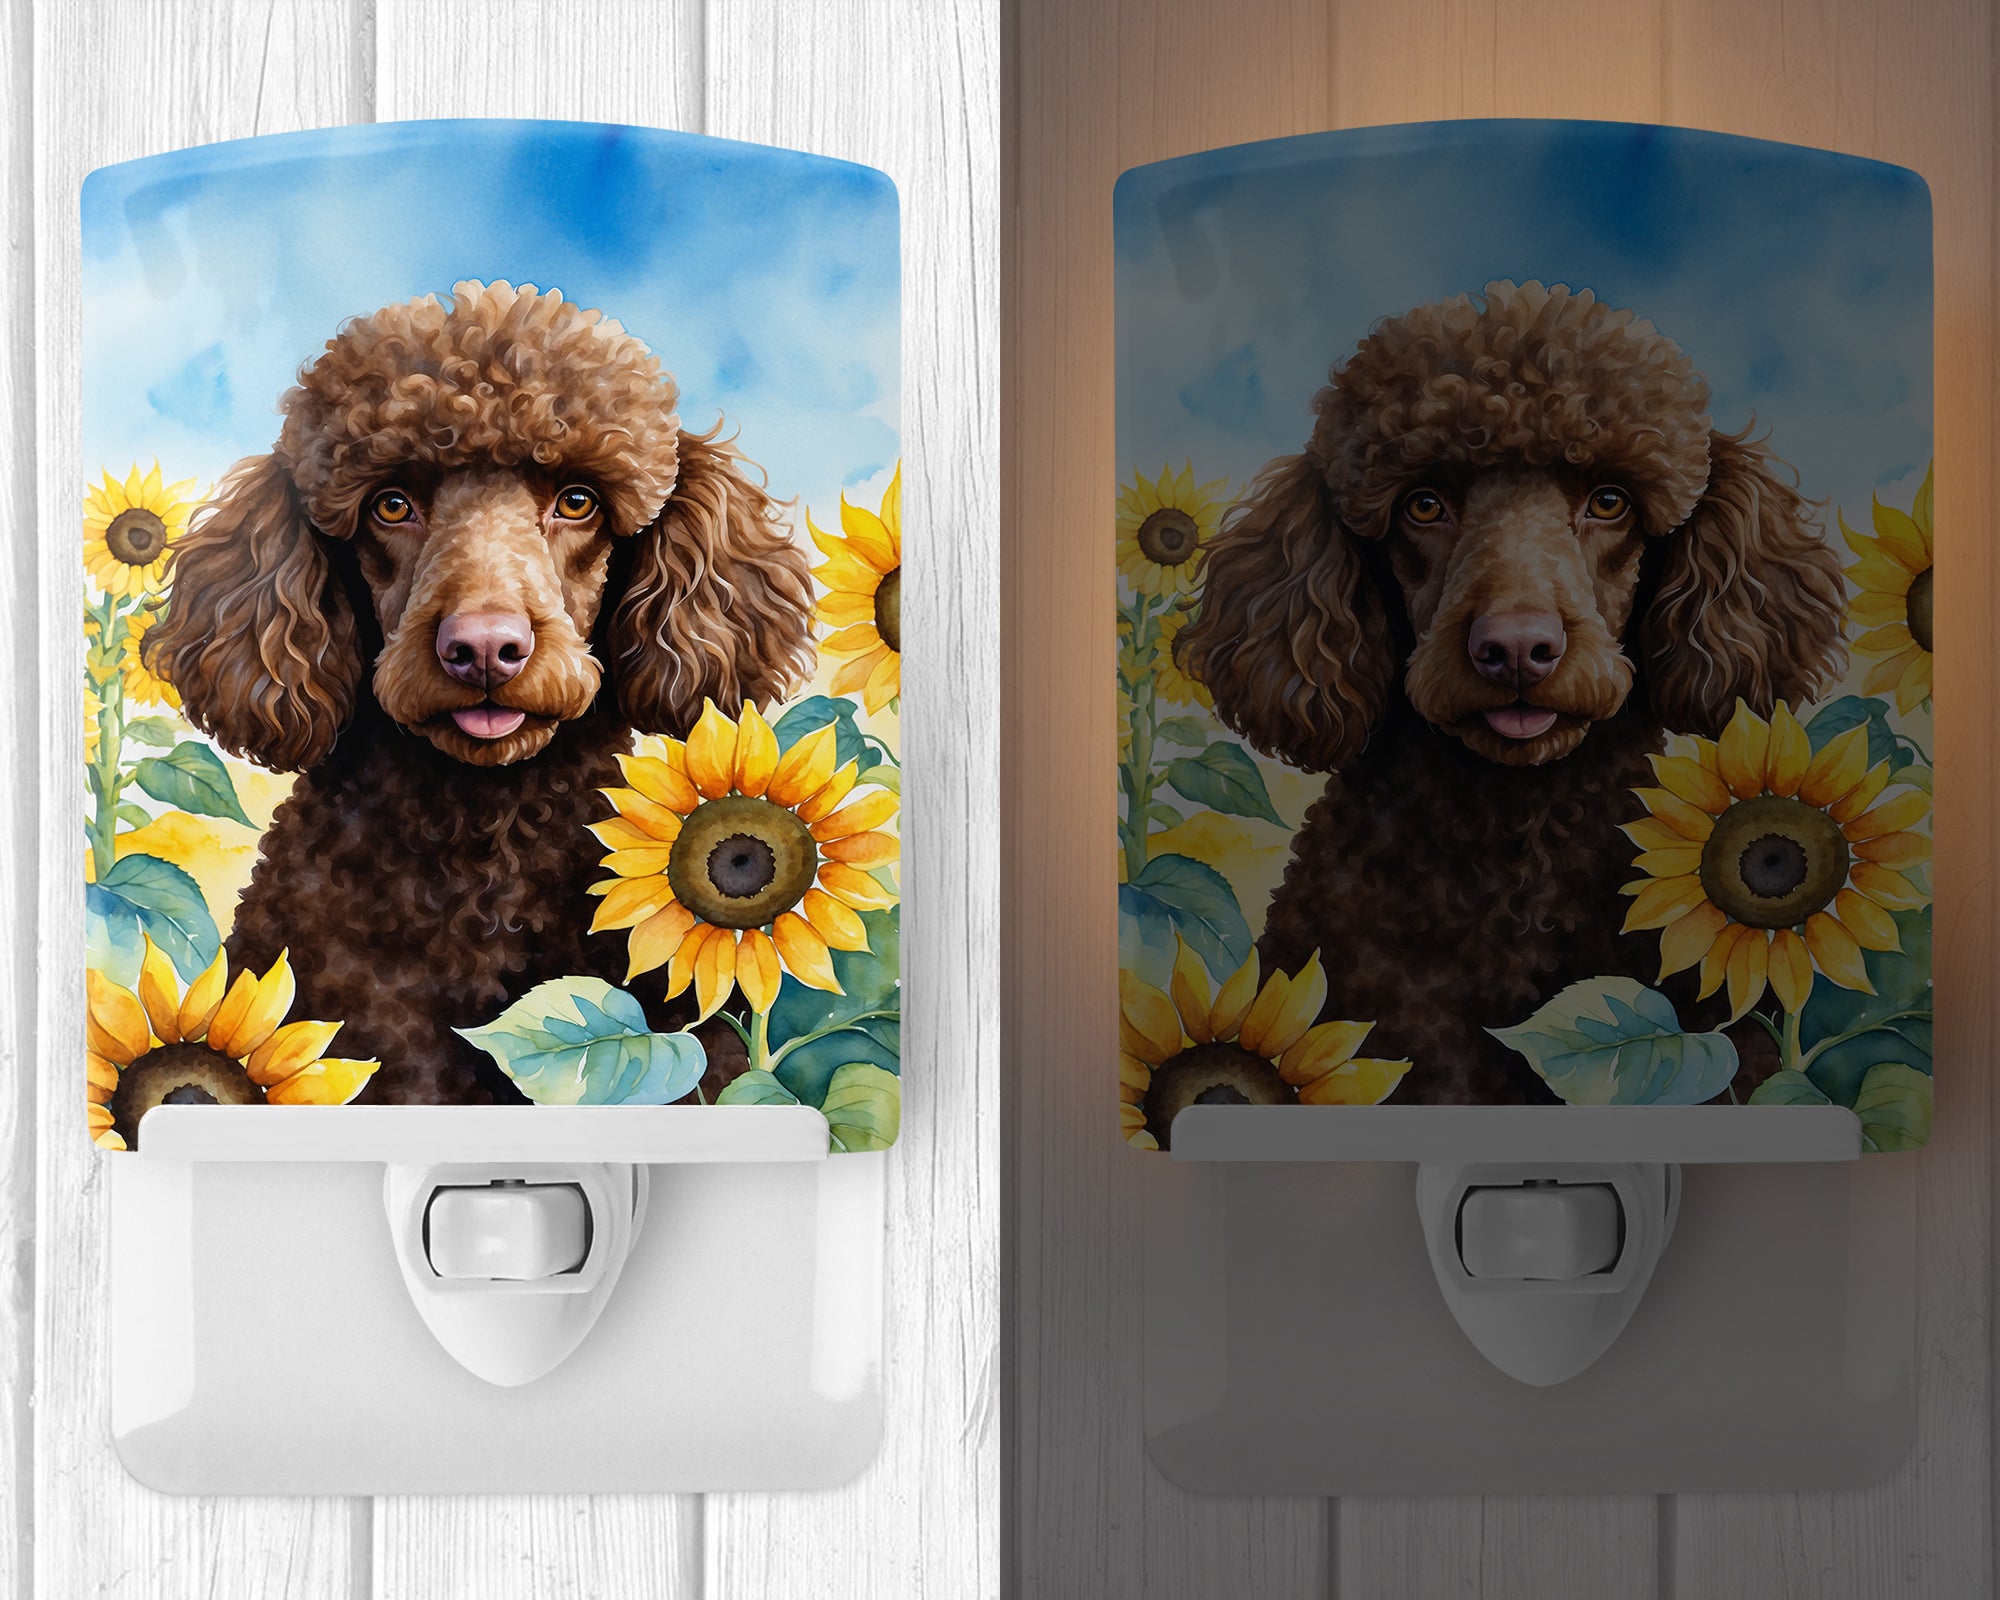 Buy this Chocolate Poodle in Sunflowers Ceramic Night Light